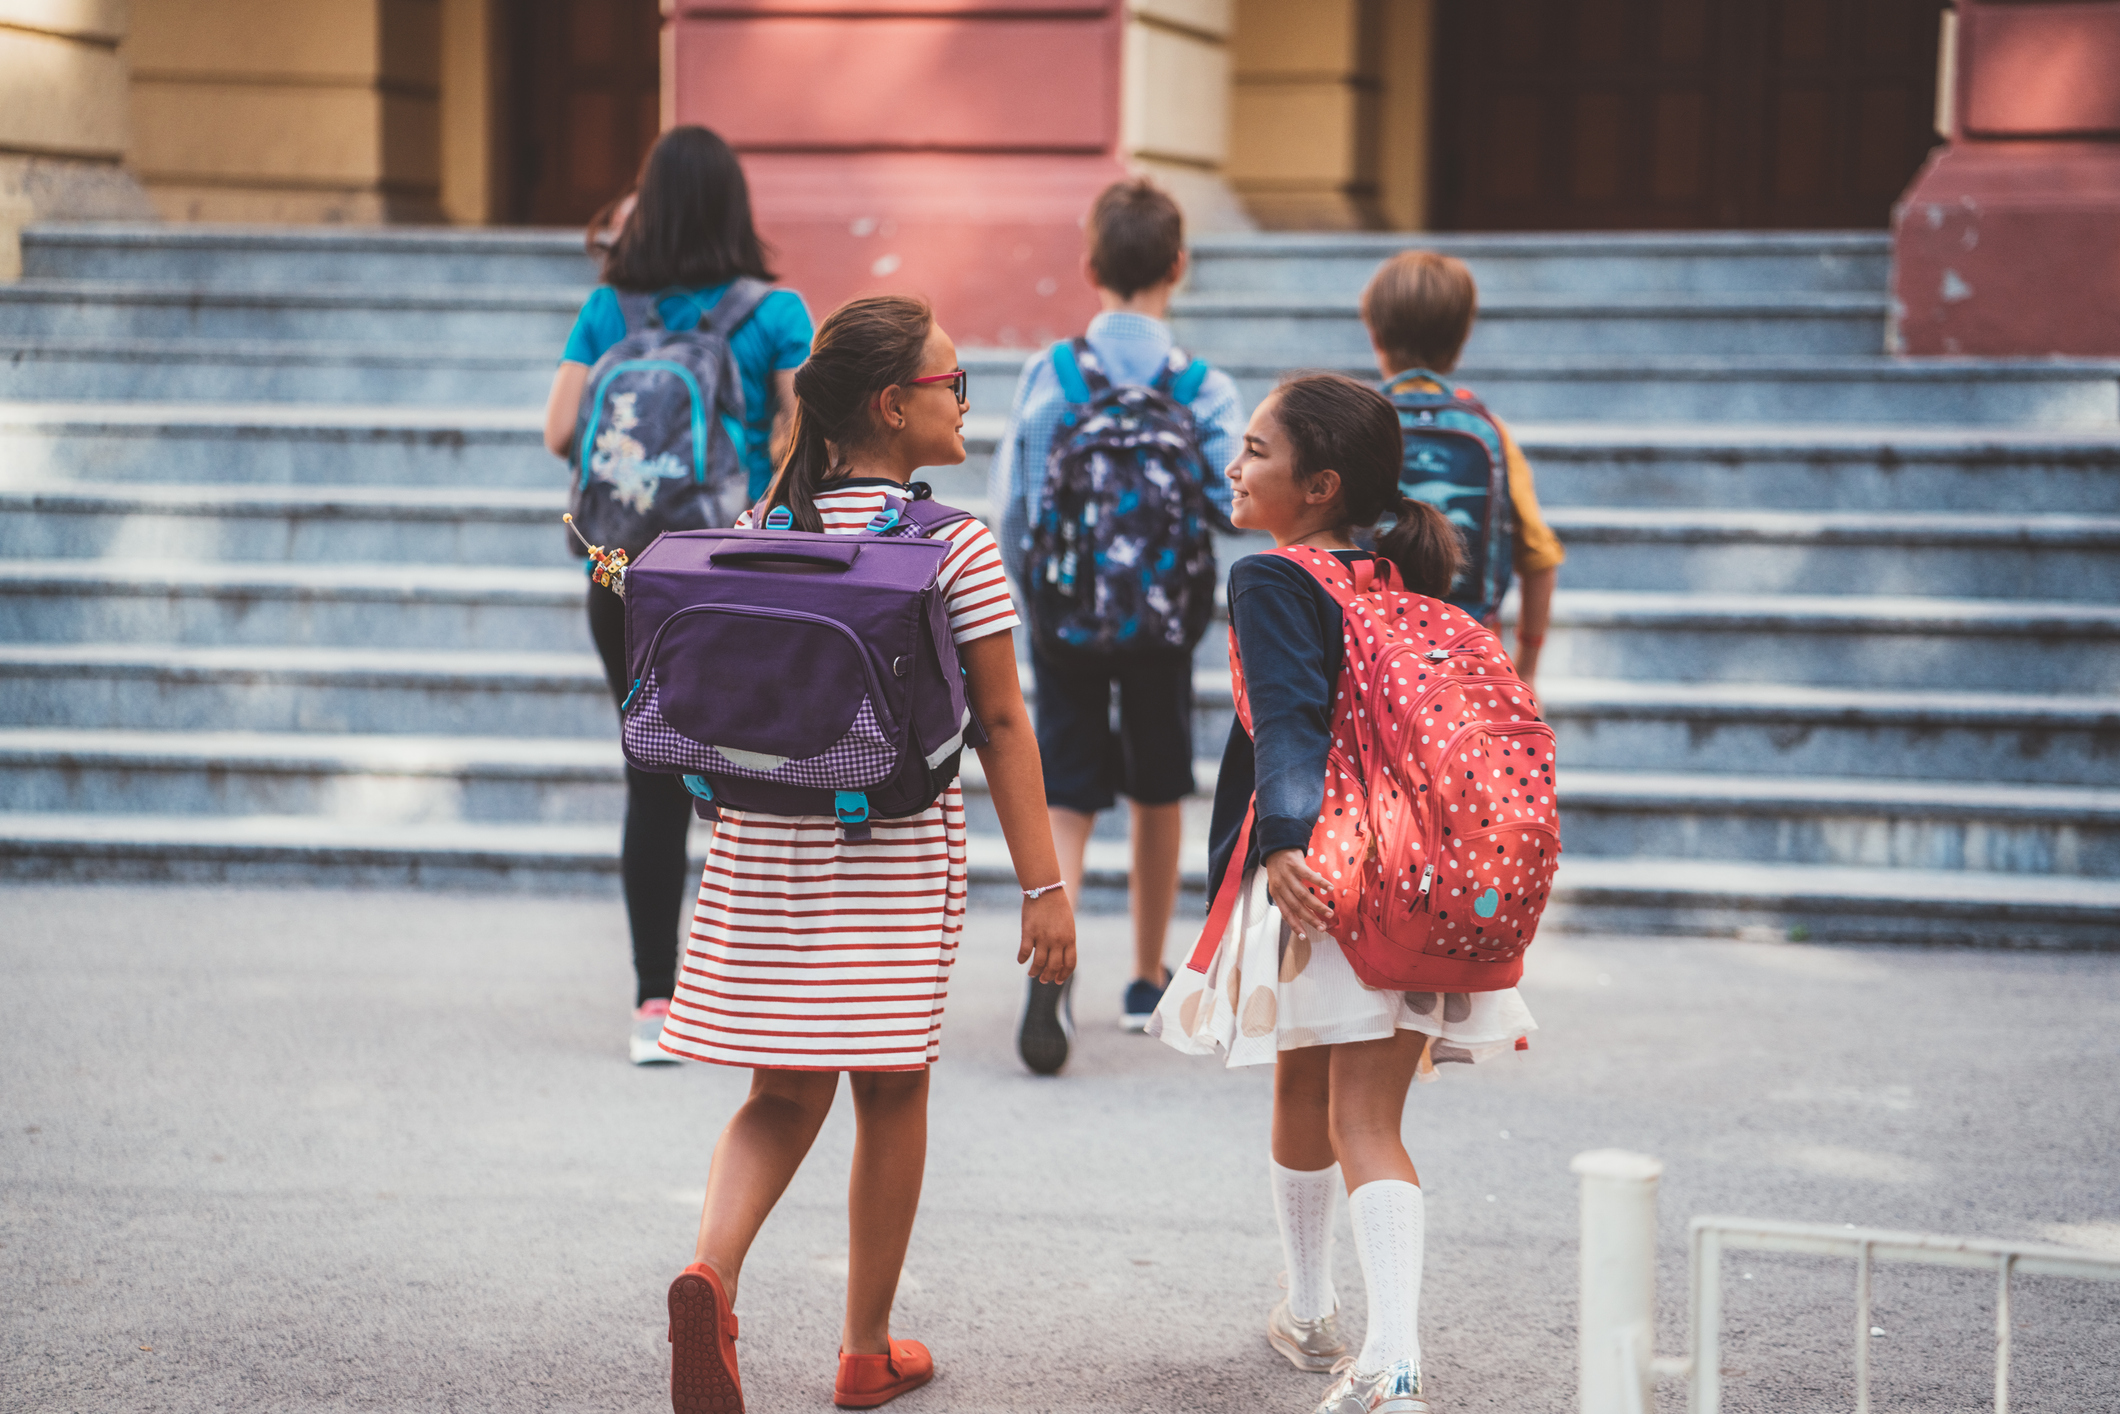 Two adolescent girls wearing backpacks walk toward a middle school building with other students in backpacks.